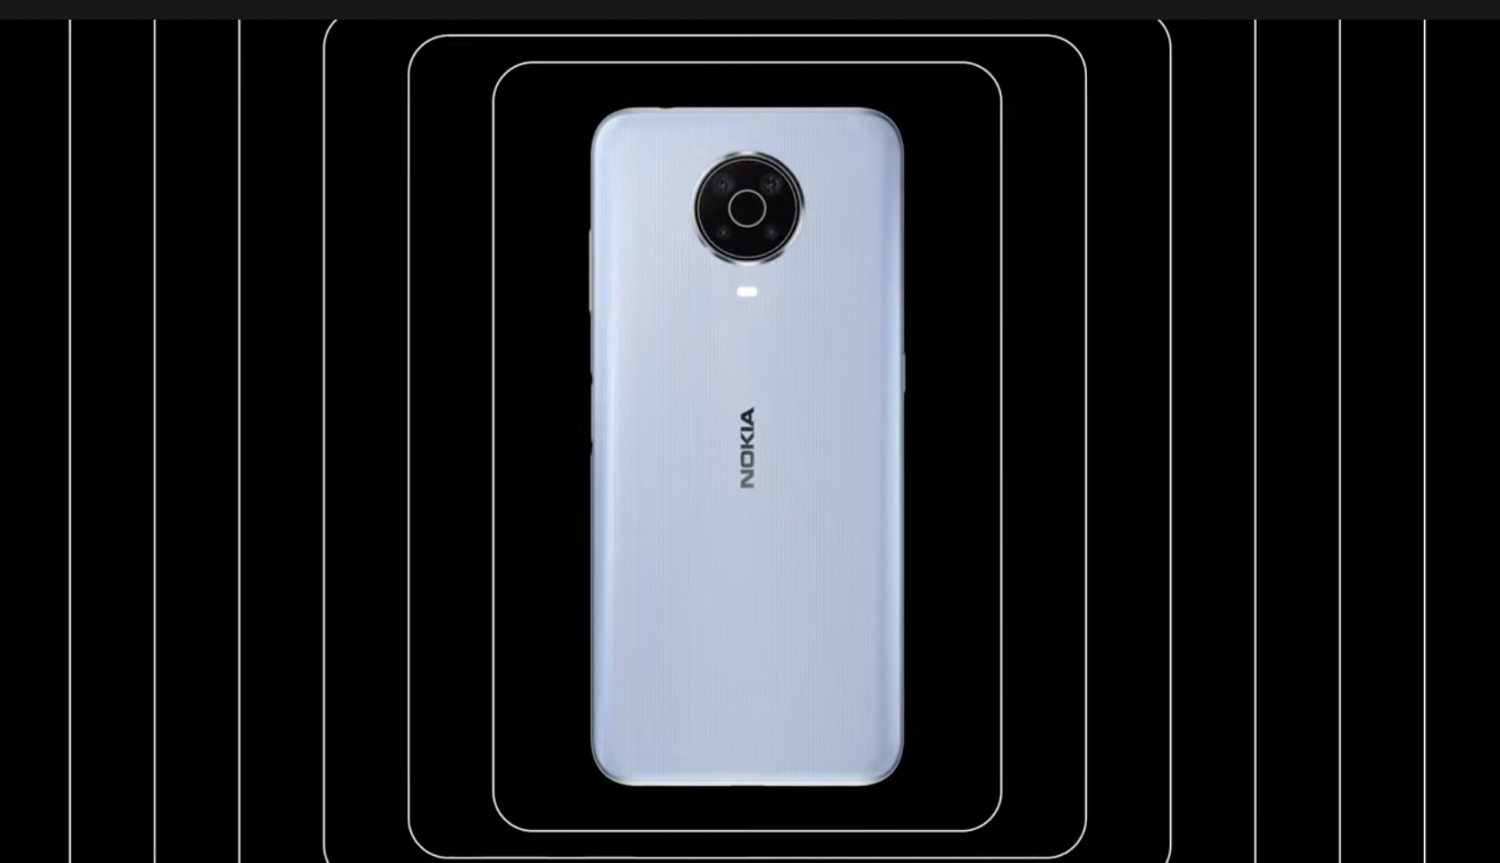 Nokia 2720 Flip Phones With Google Assistant is Coming to Verizon on May 20